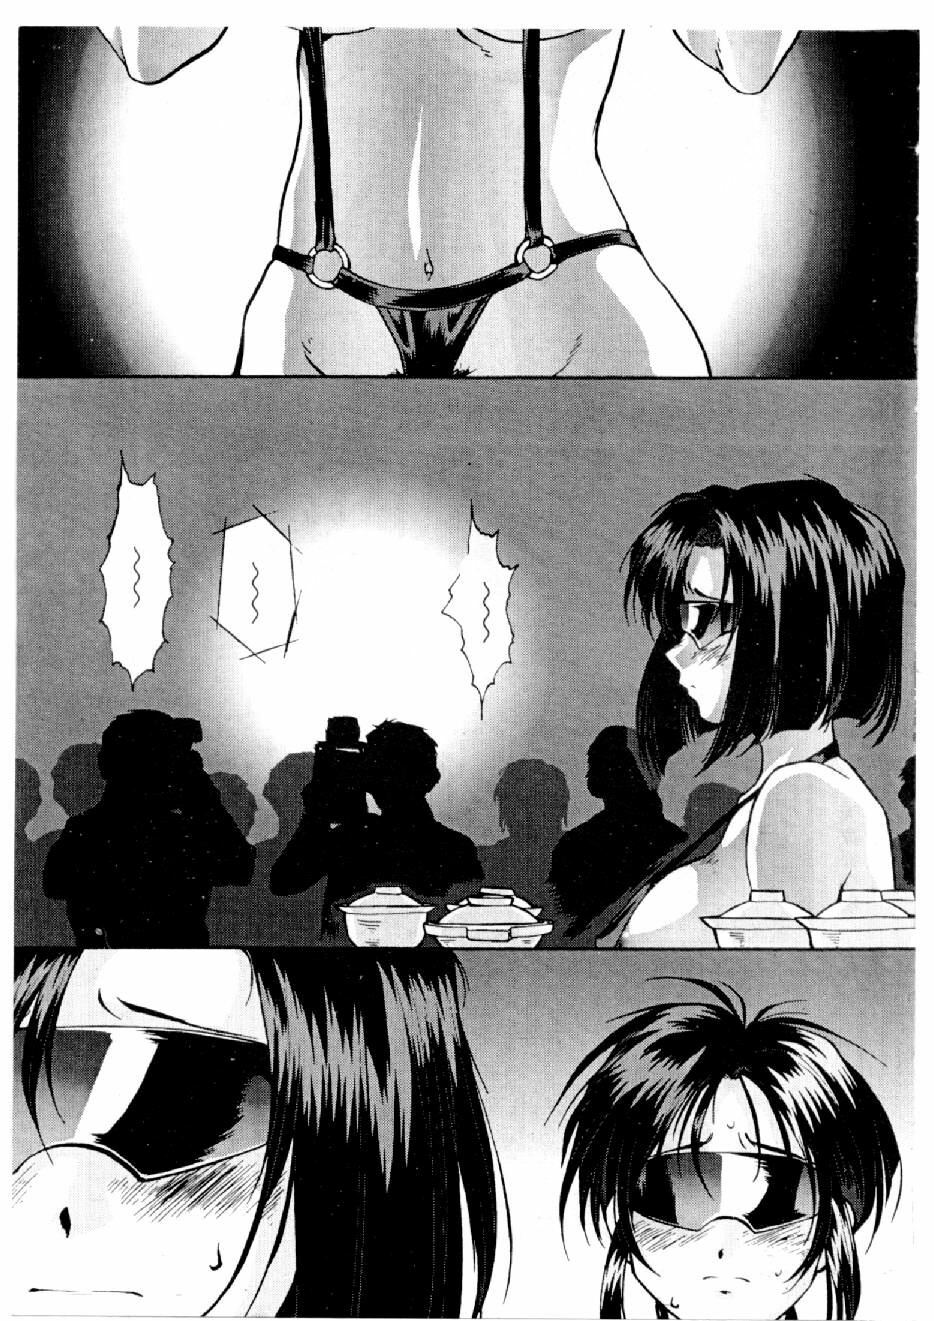 [Mizuno Kei] Cutie Police Woman 2 (You're Under Arrest) [Chinese] page 10 full